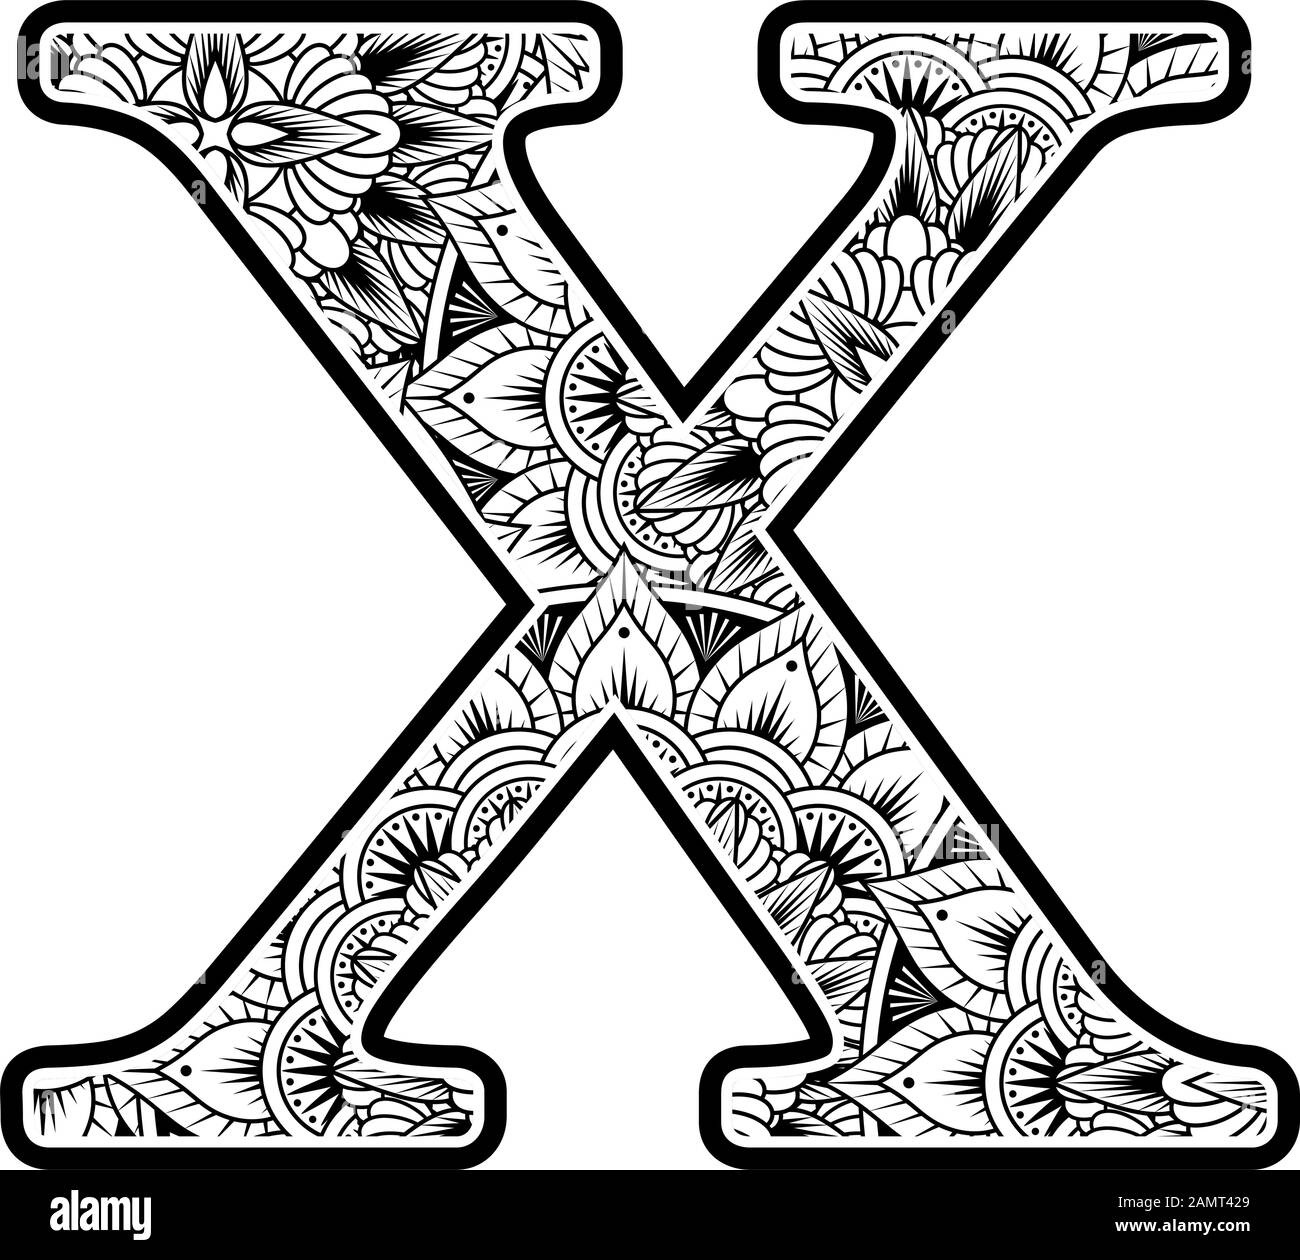 capital letter x with abstract flowers ornaments in black and white. design inspired from mandala art style for coloring. Isolated on white background Stock Vector